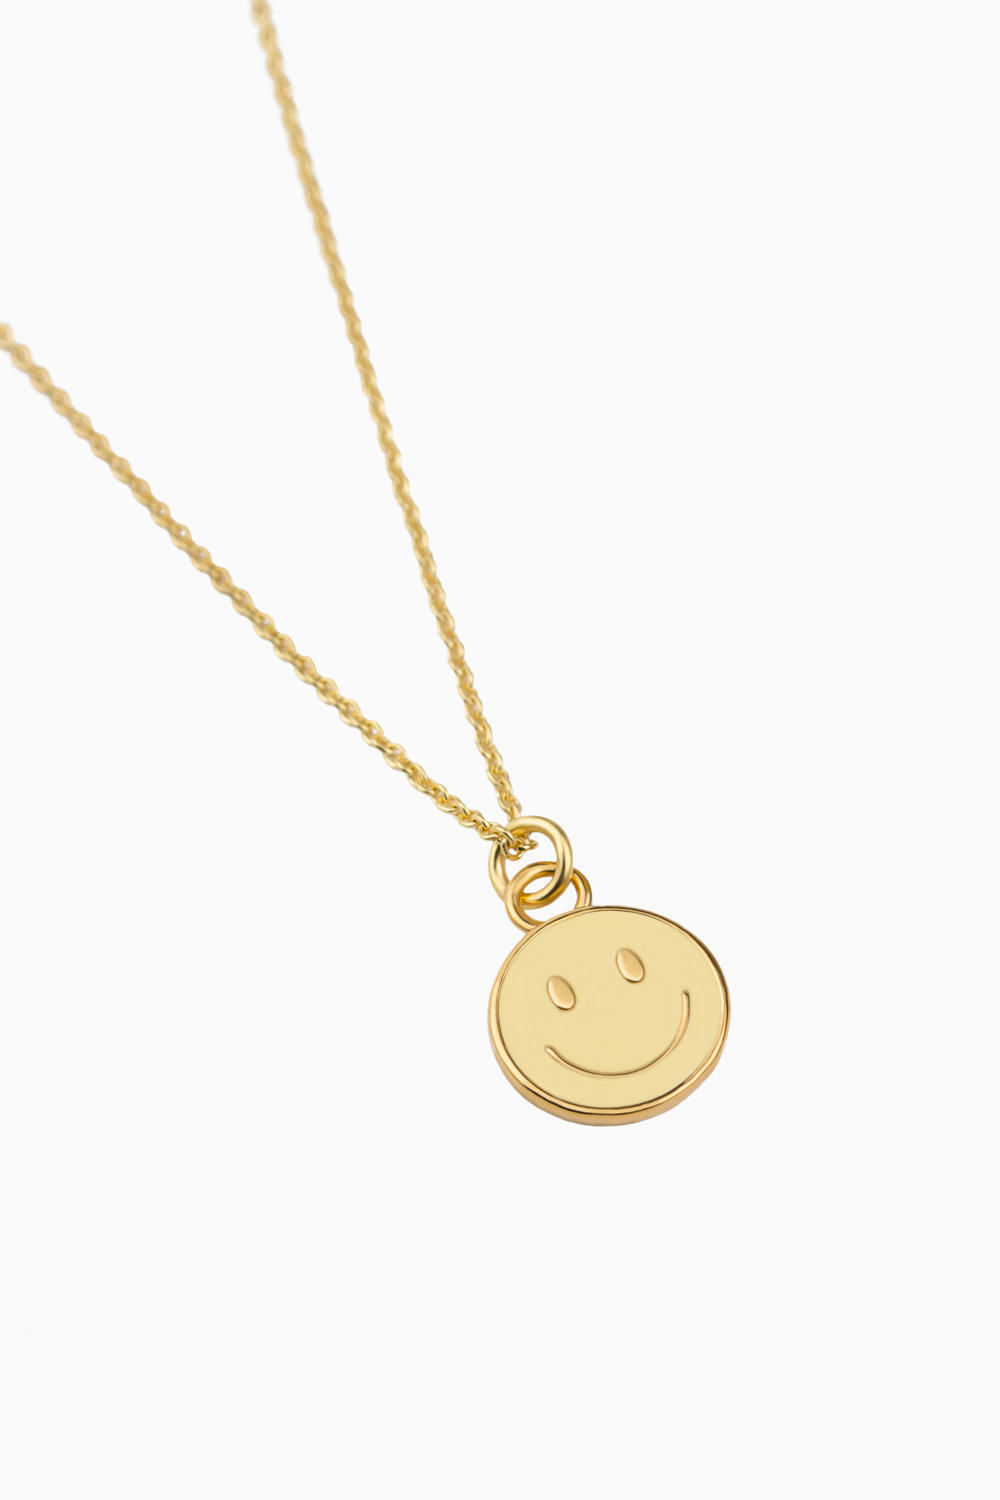 smiley-necklace2